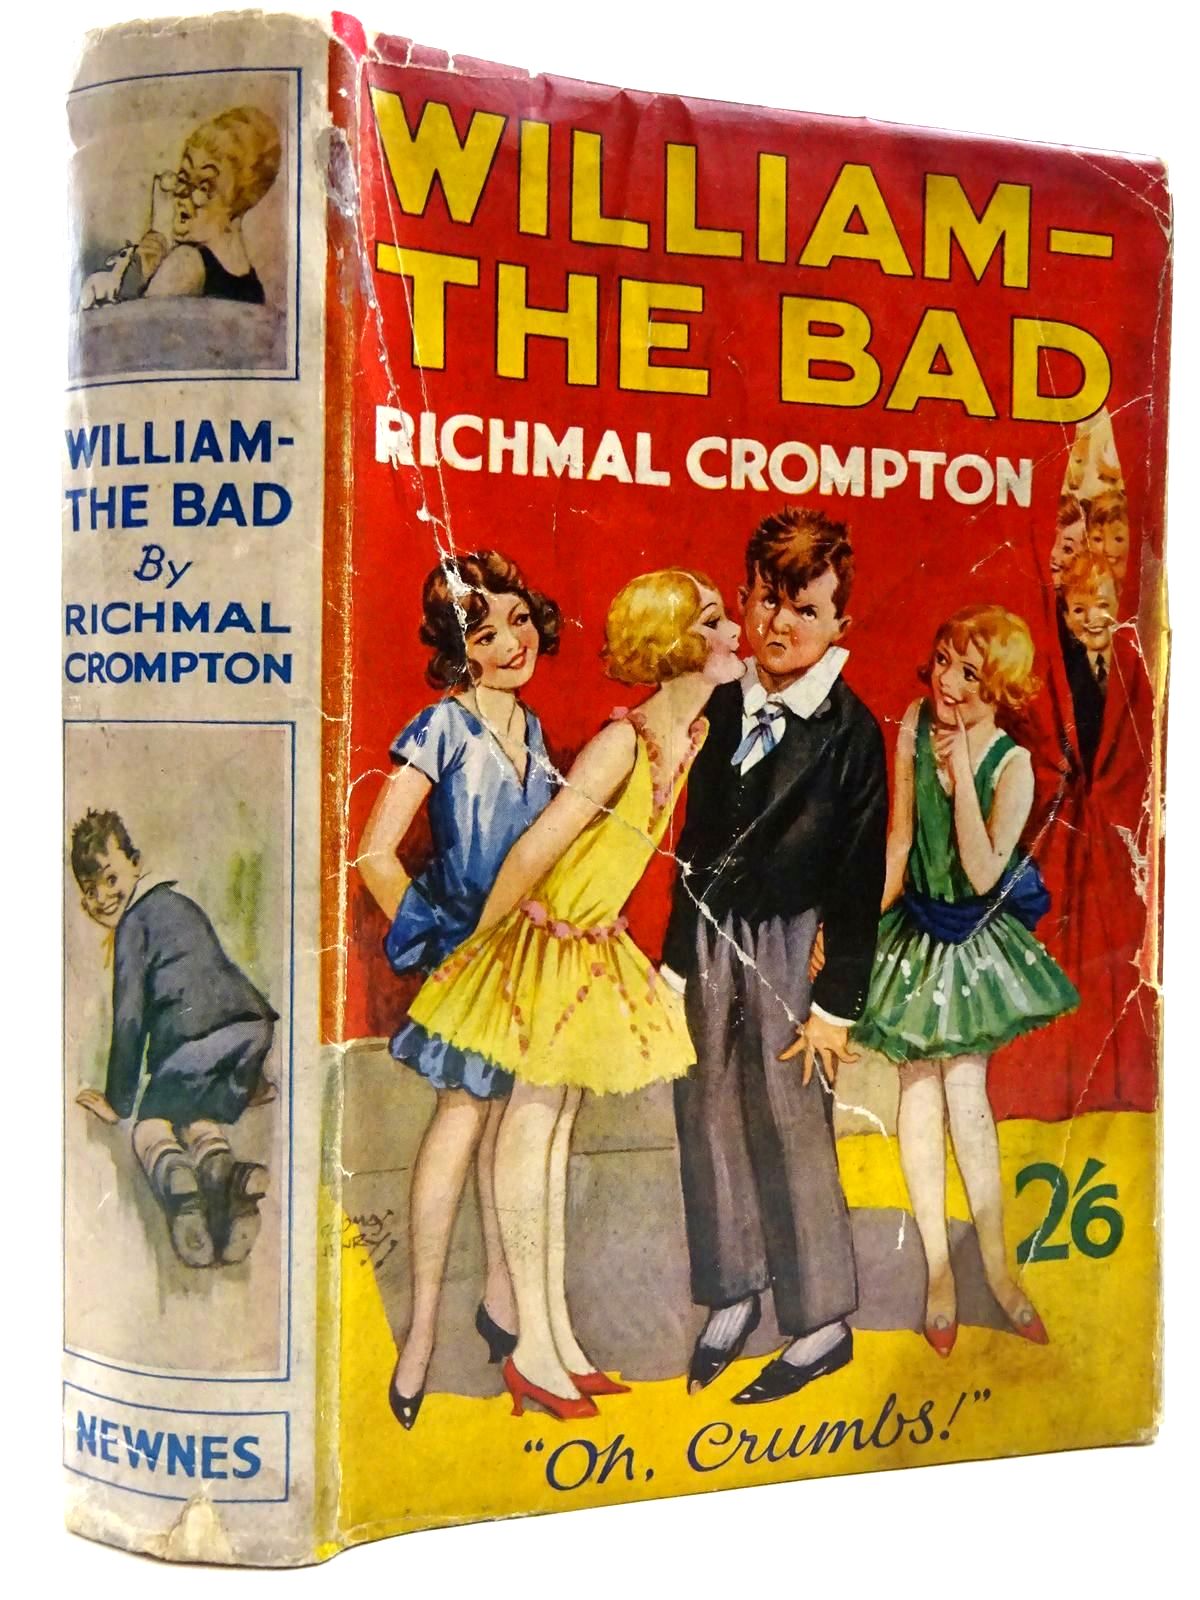 Cover of WILLIAM-THE BAD by Richmal Crompton